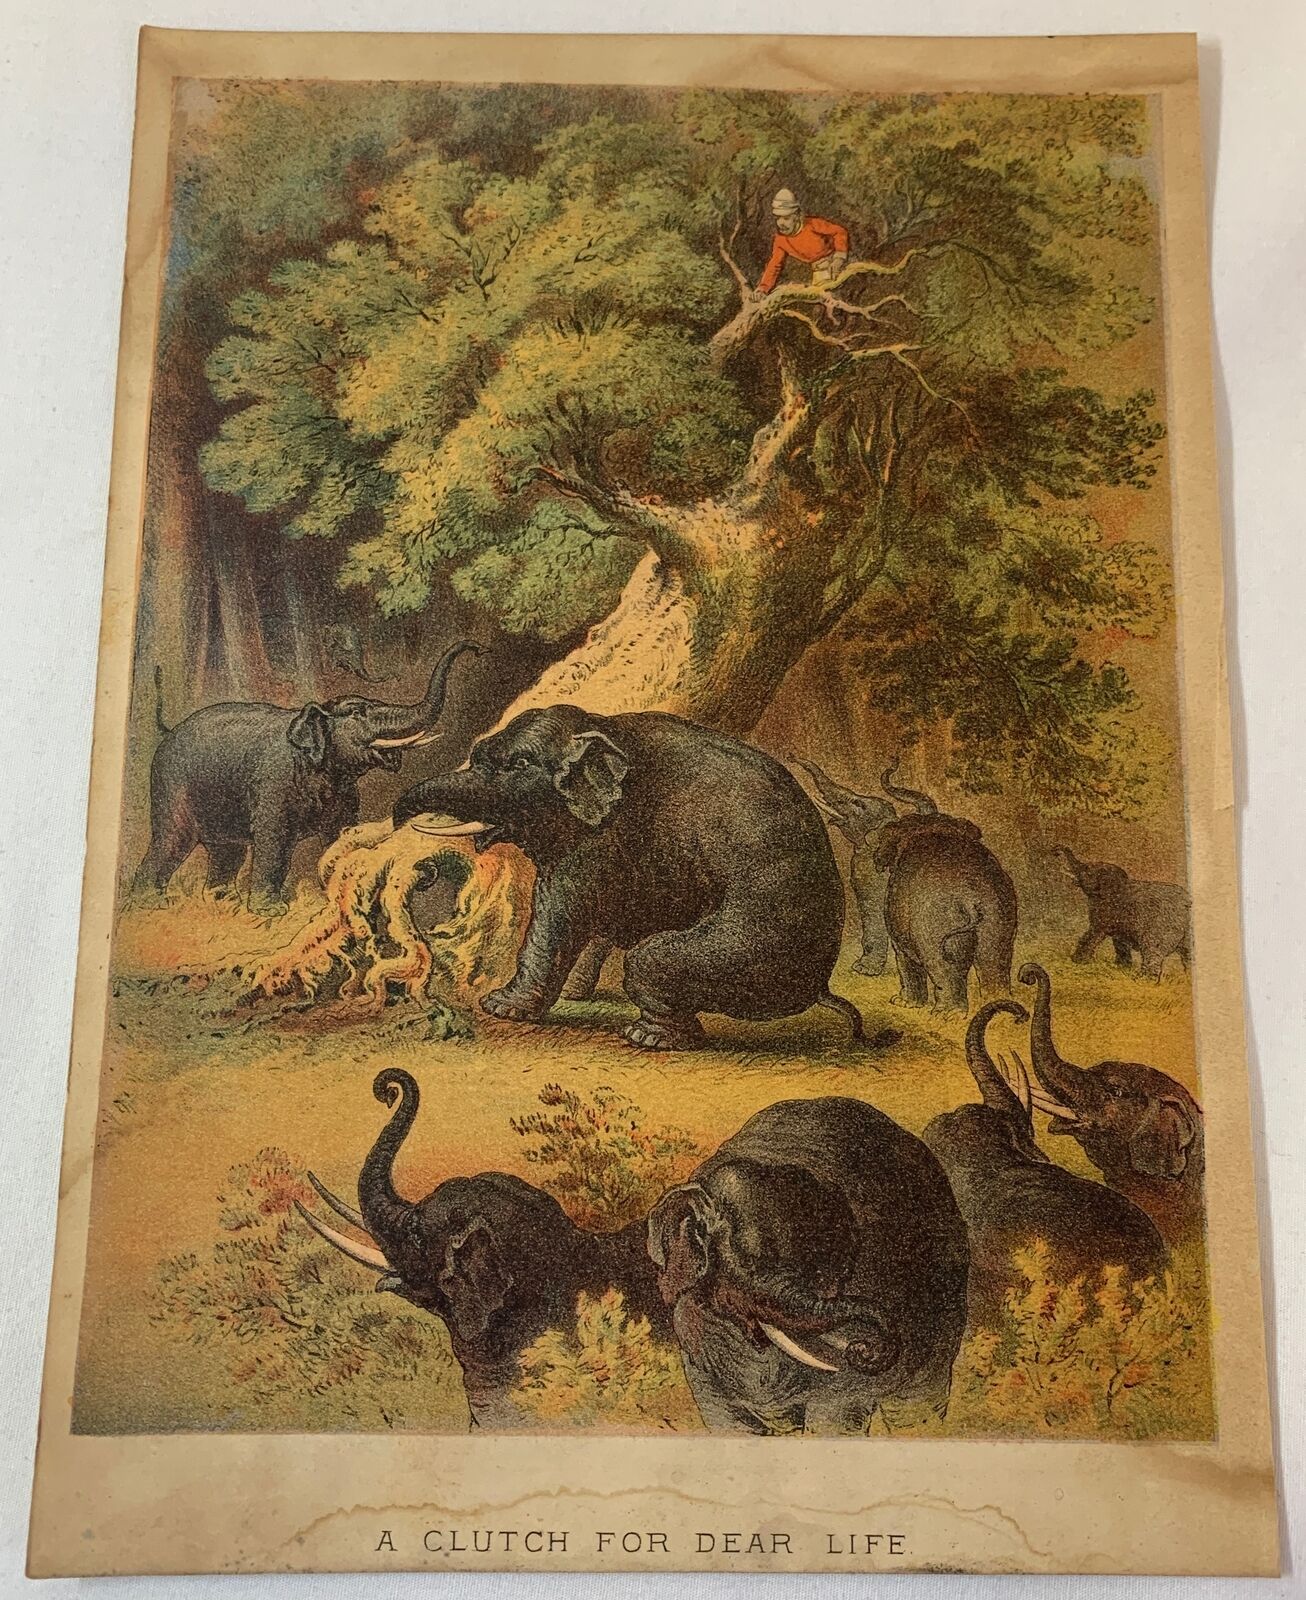 1879 lithograph~ ELEPHANT UPROOTING A TREE WITH A MAN IN IT Clutch For Dear Life